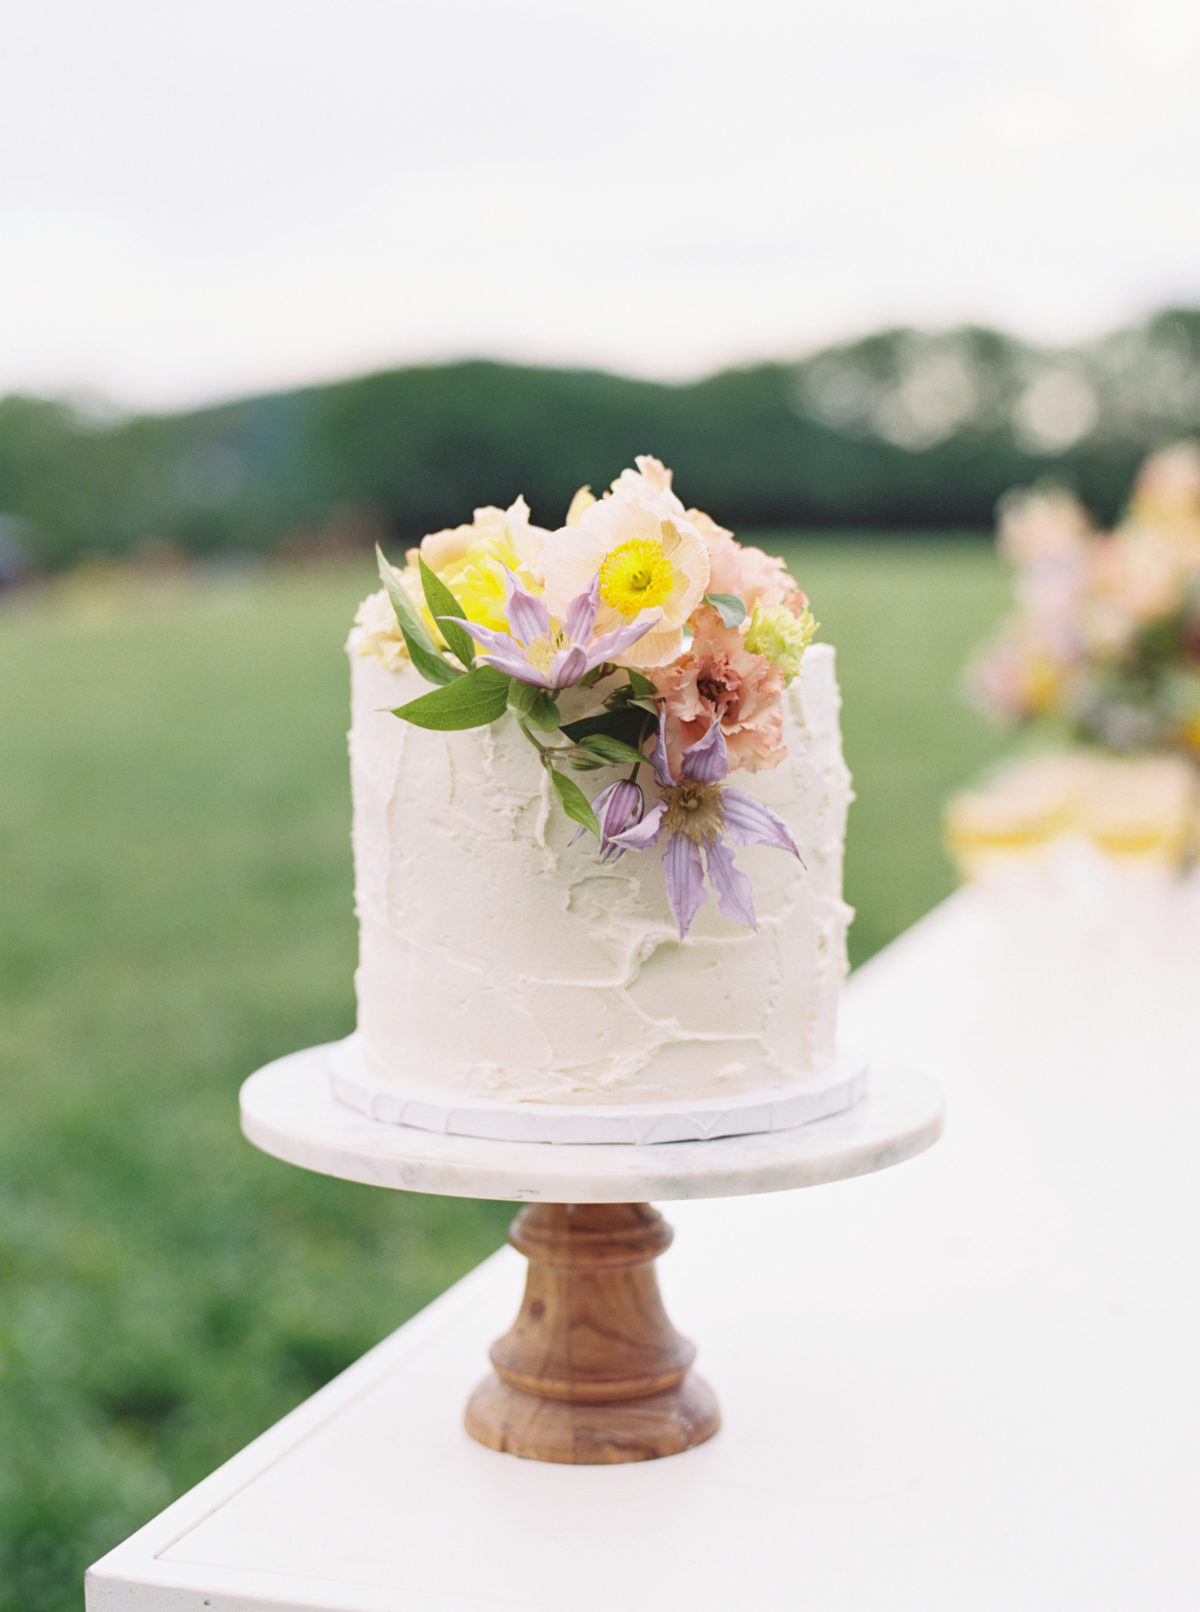 Classic wedding cake by Copper Whisk in Nashville.